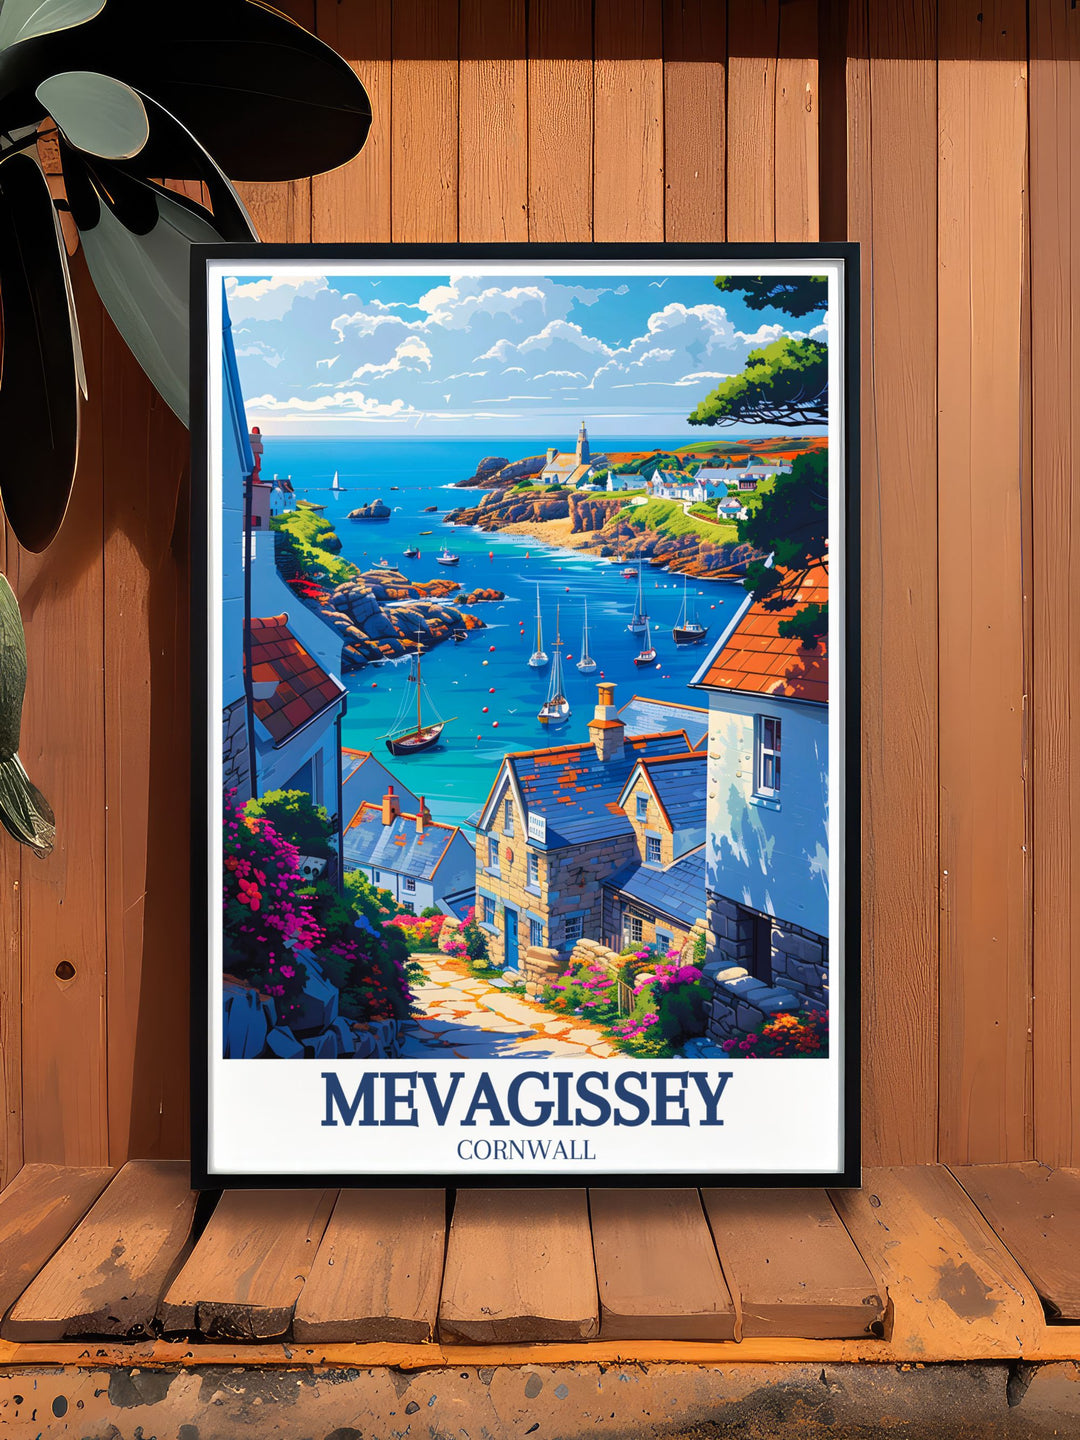 Mevagissey, with its iconic Clock Tower and historic St. Peters Church, is highlighted in this poster. This artwork captures the unique landmarks and scenic beauty of the village, making it a perfect addition to your home decor.